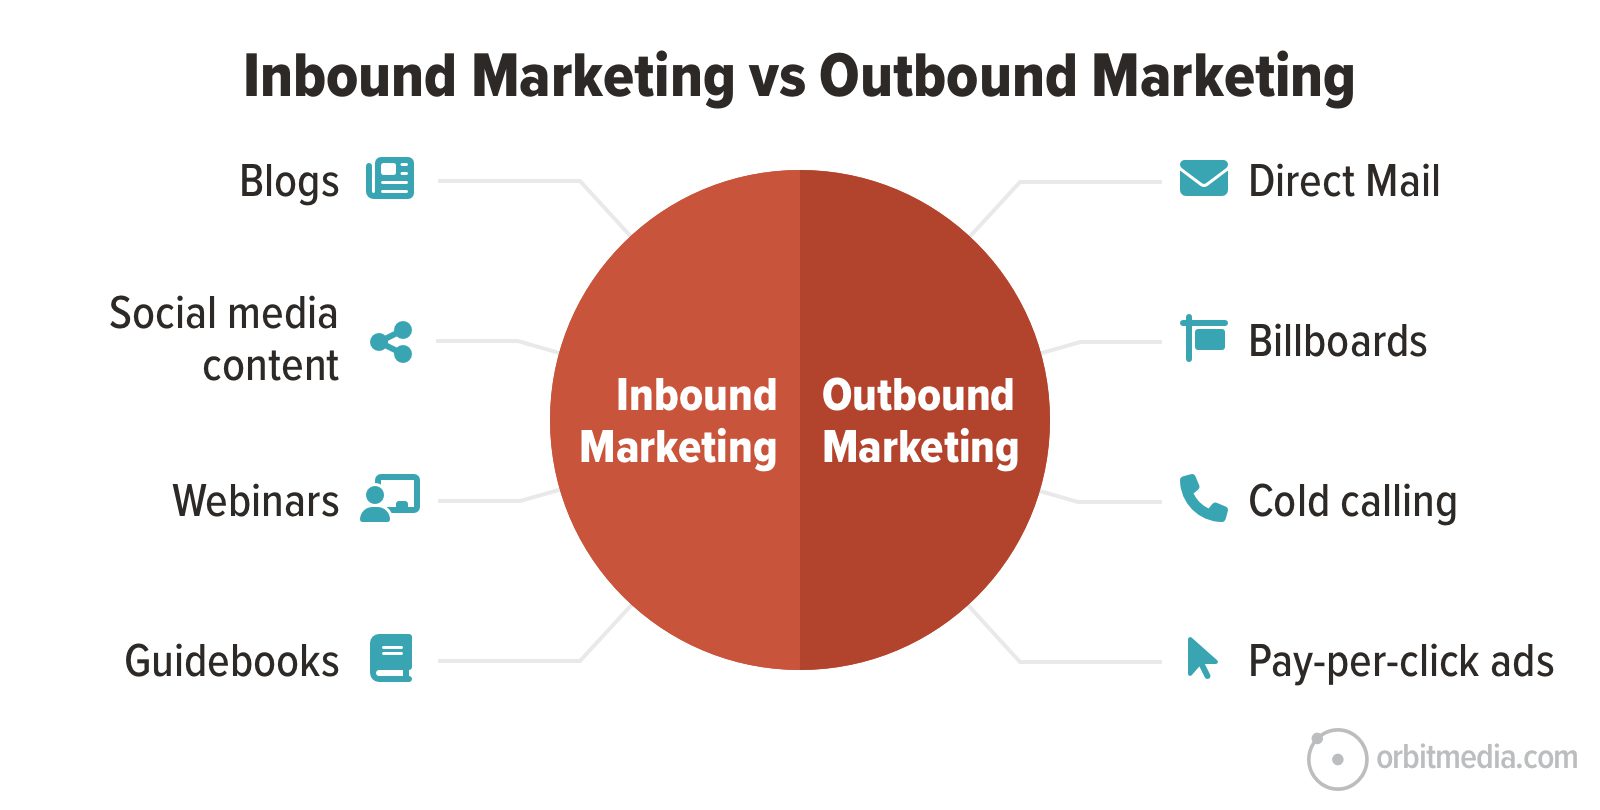 Infographic comparing inbound marketing (blogs, social media content, webinars, guidebooks) and outbound marketing (direct mail, billboards, cold calling, pay-per-click ads).